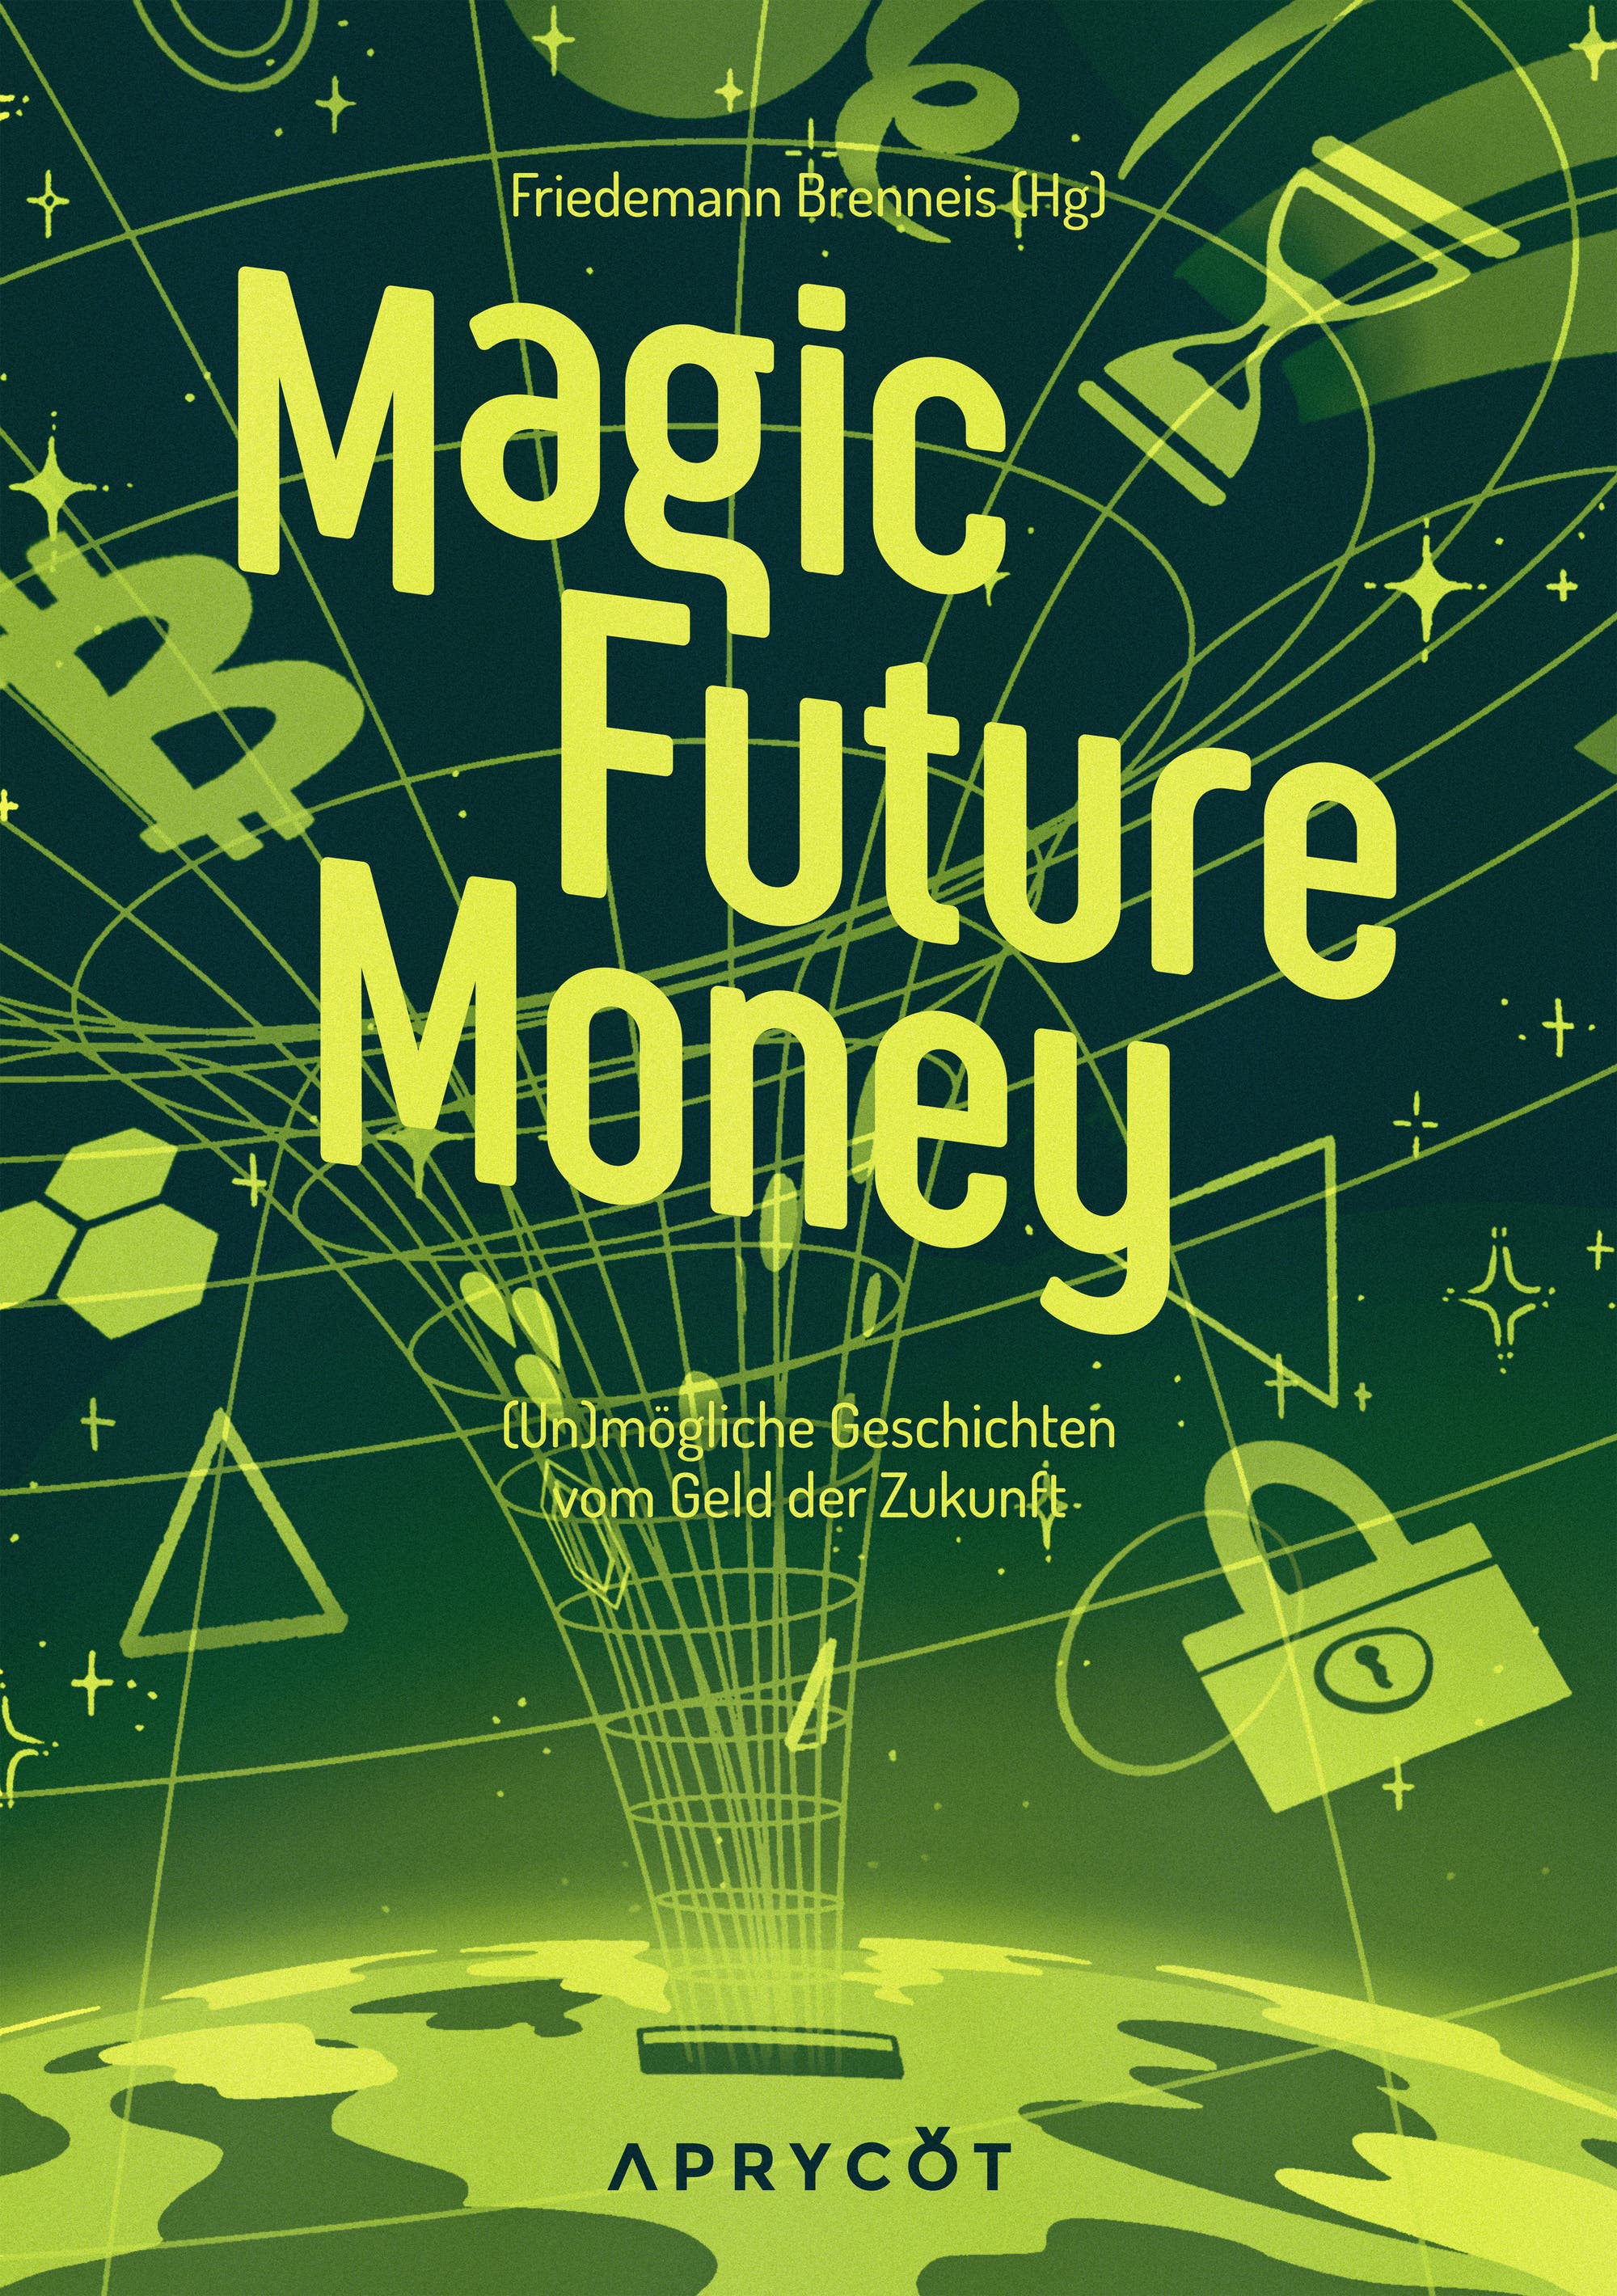 Review of the book “Magic Future Money”